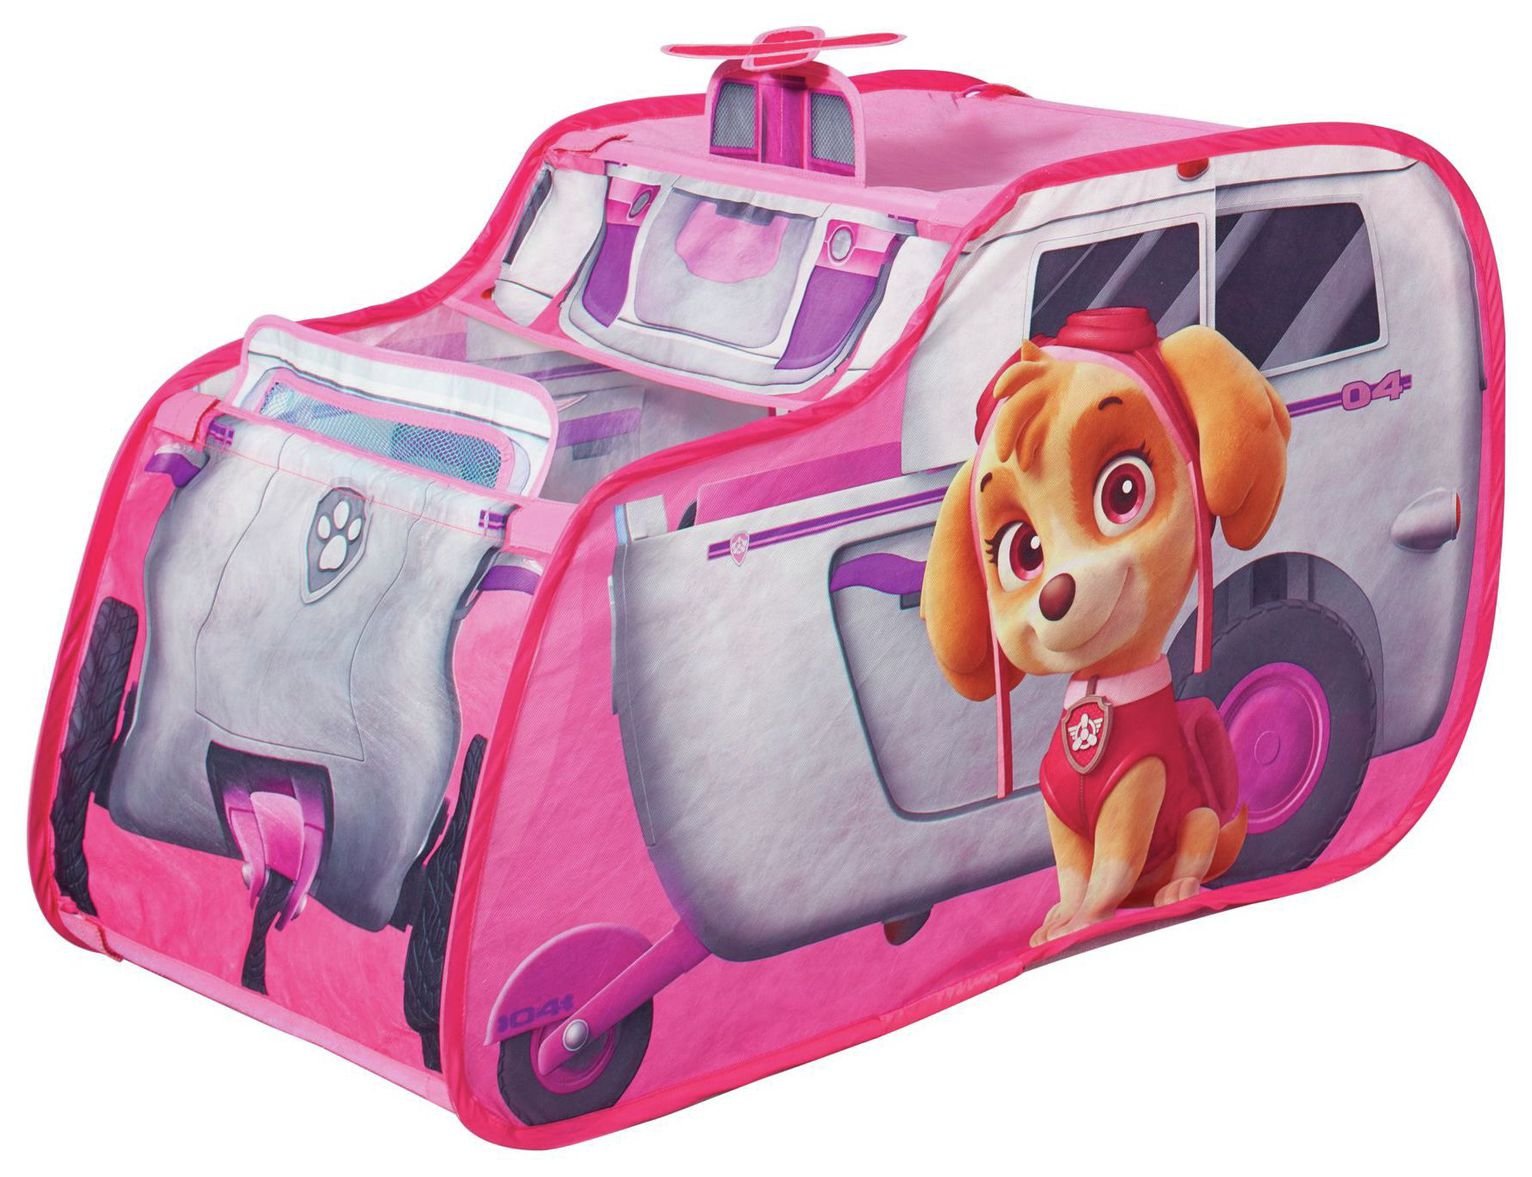 PAW Patrol Skye's Helicopter Pop Up Playtent